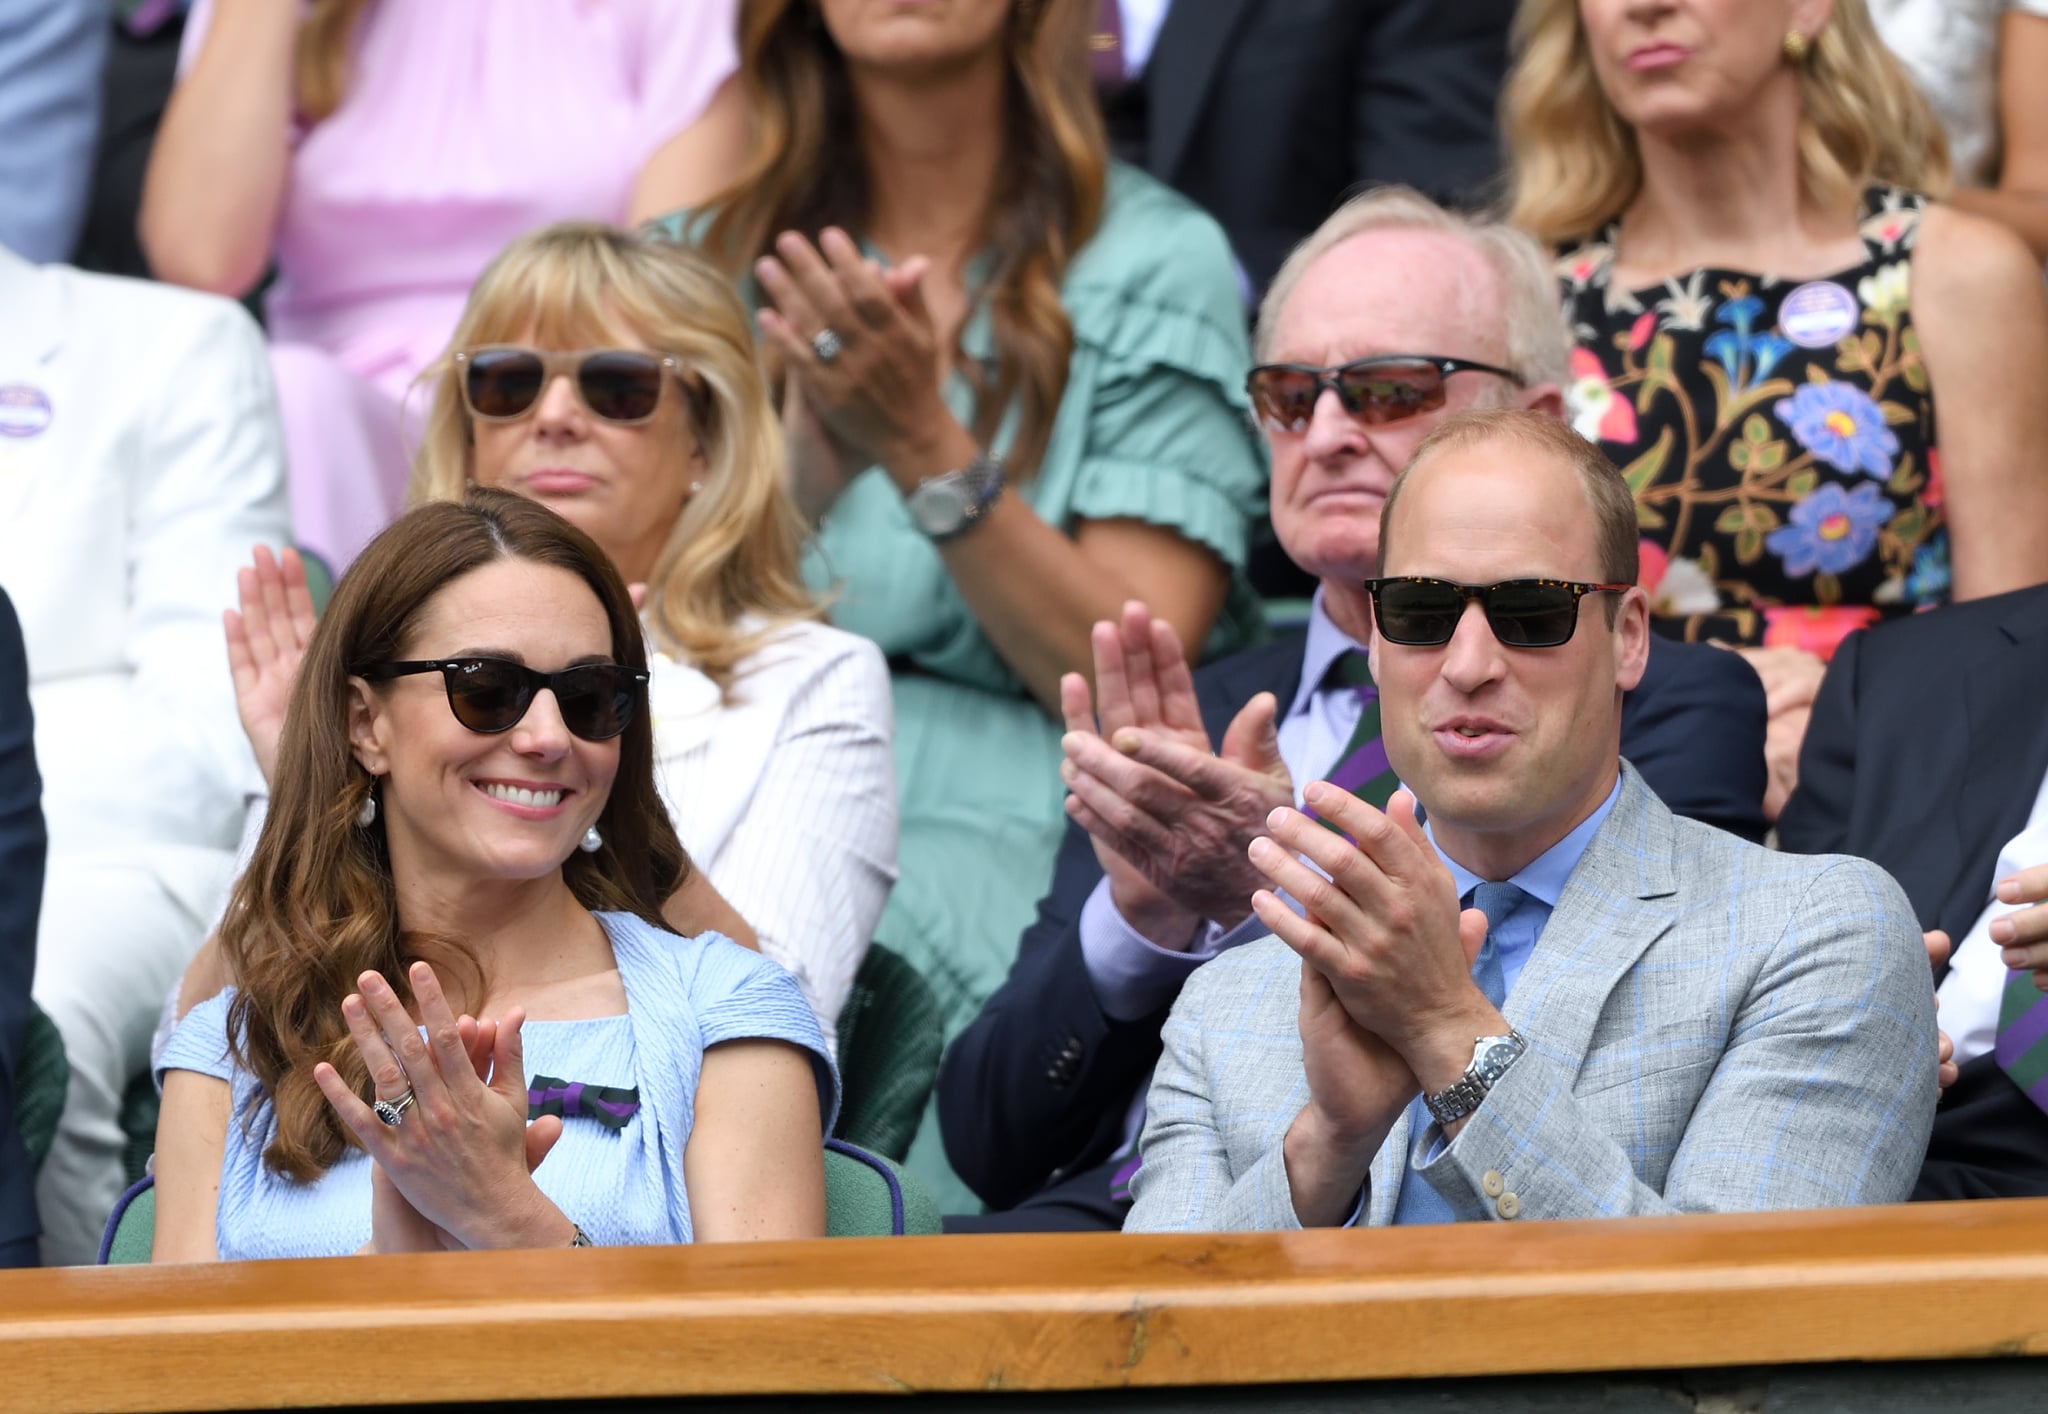 LONDON, ENGLAND - JULY 14: Catherine, Duchess of Cambridge and Prince William, Duke of Cambridge in the Royal Box on Centre court during Men's Finals Day of the Wimbledon Tennis Championships at All England Lawn Tennis and Croquet Club on July 14, 2019 in London, England. (Photo by Karwai Tang/Getty Images)